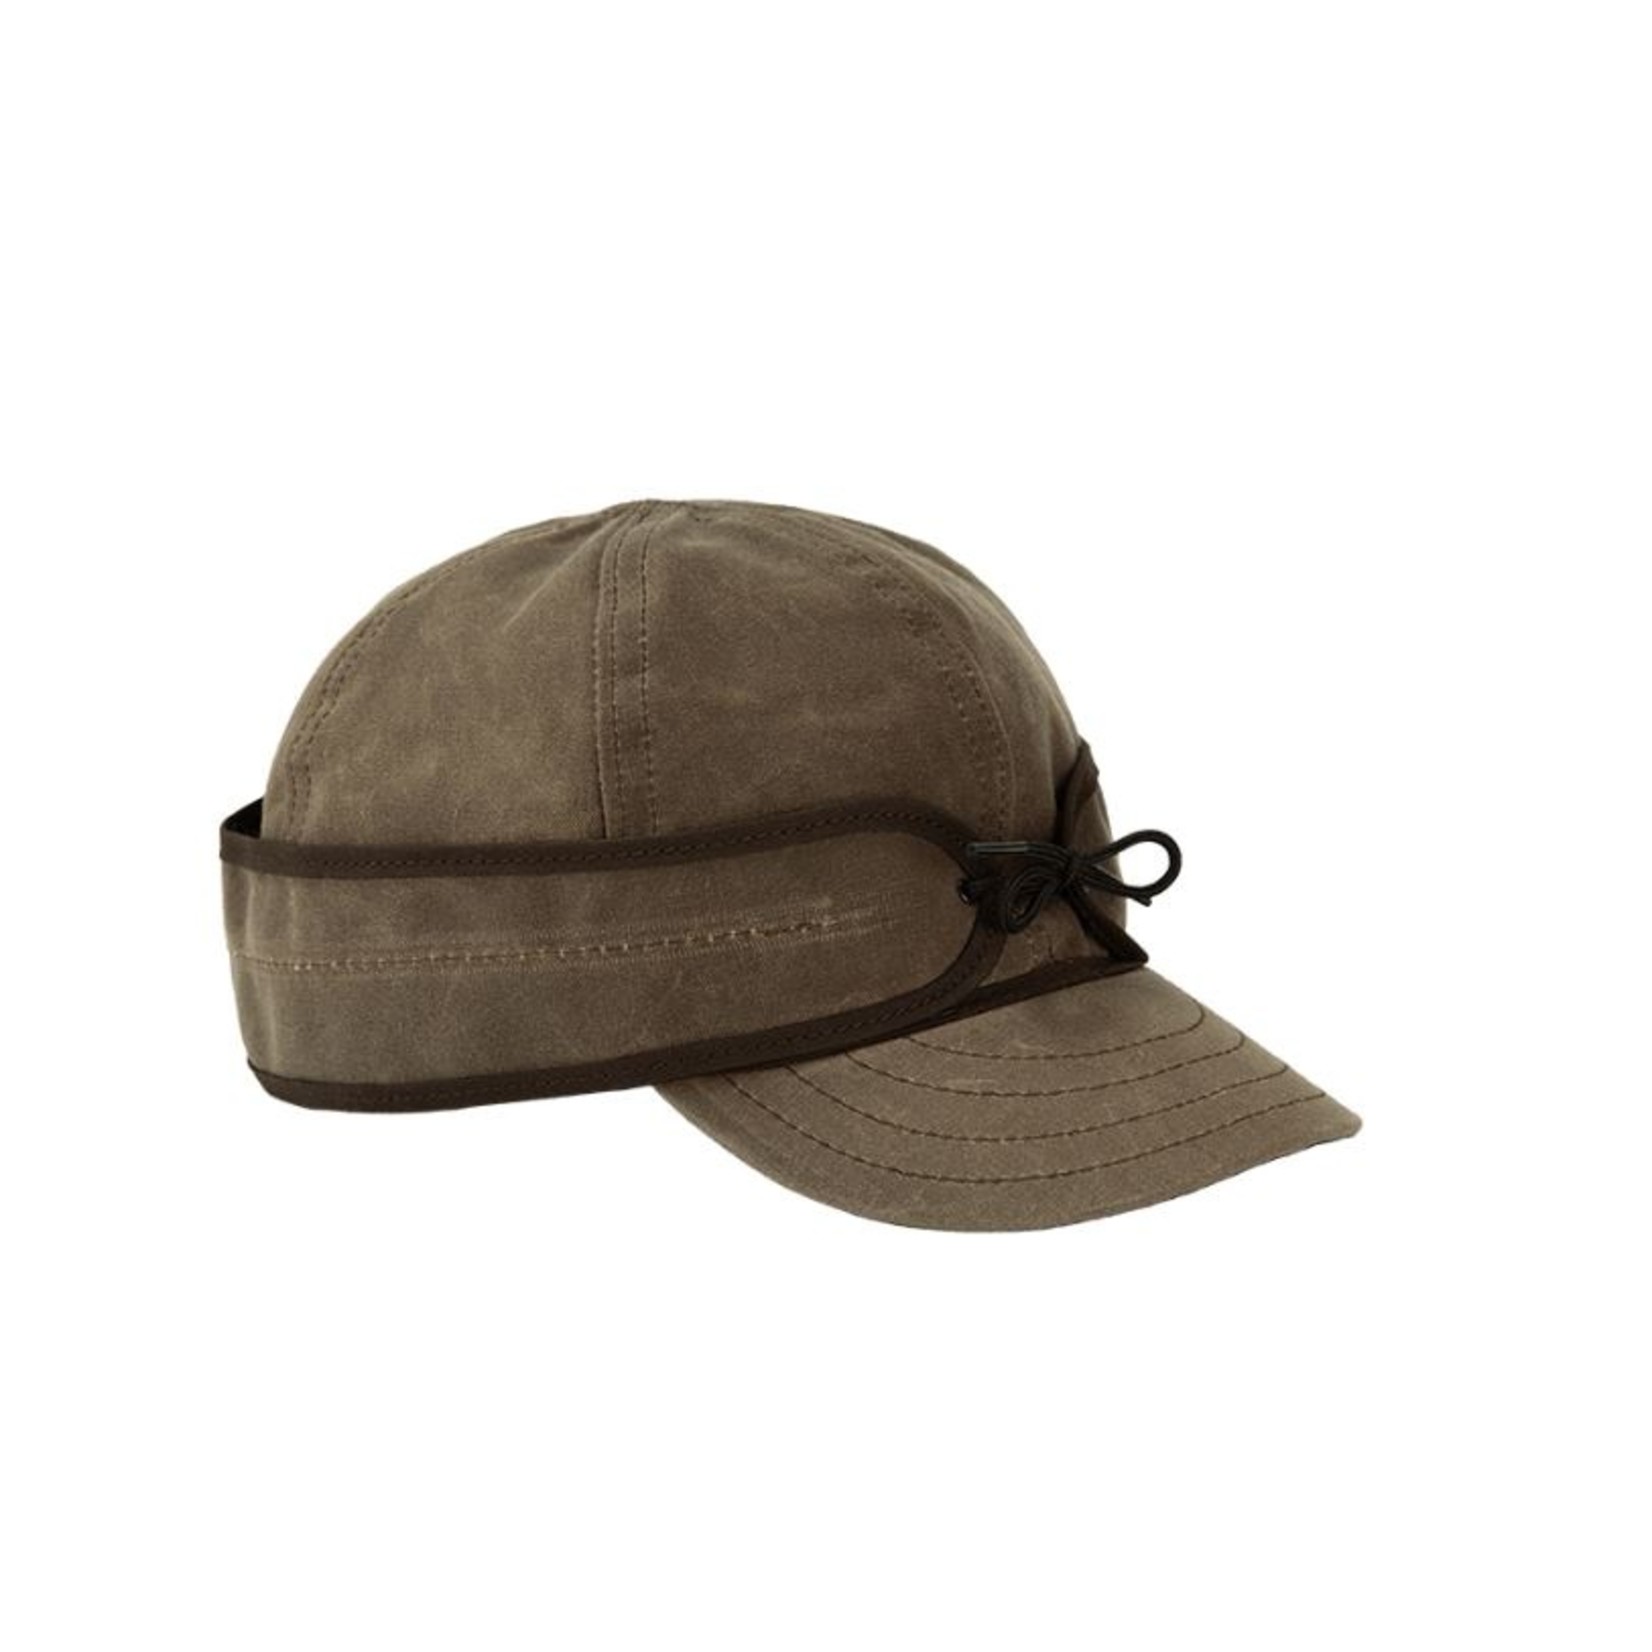 STORMY KROMER STORMY KROMER INSULATED WAXED COTTON CAP